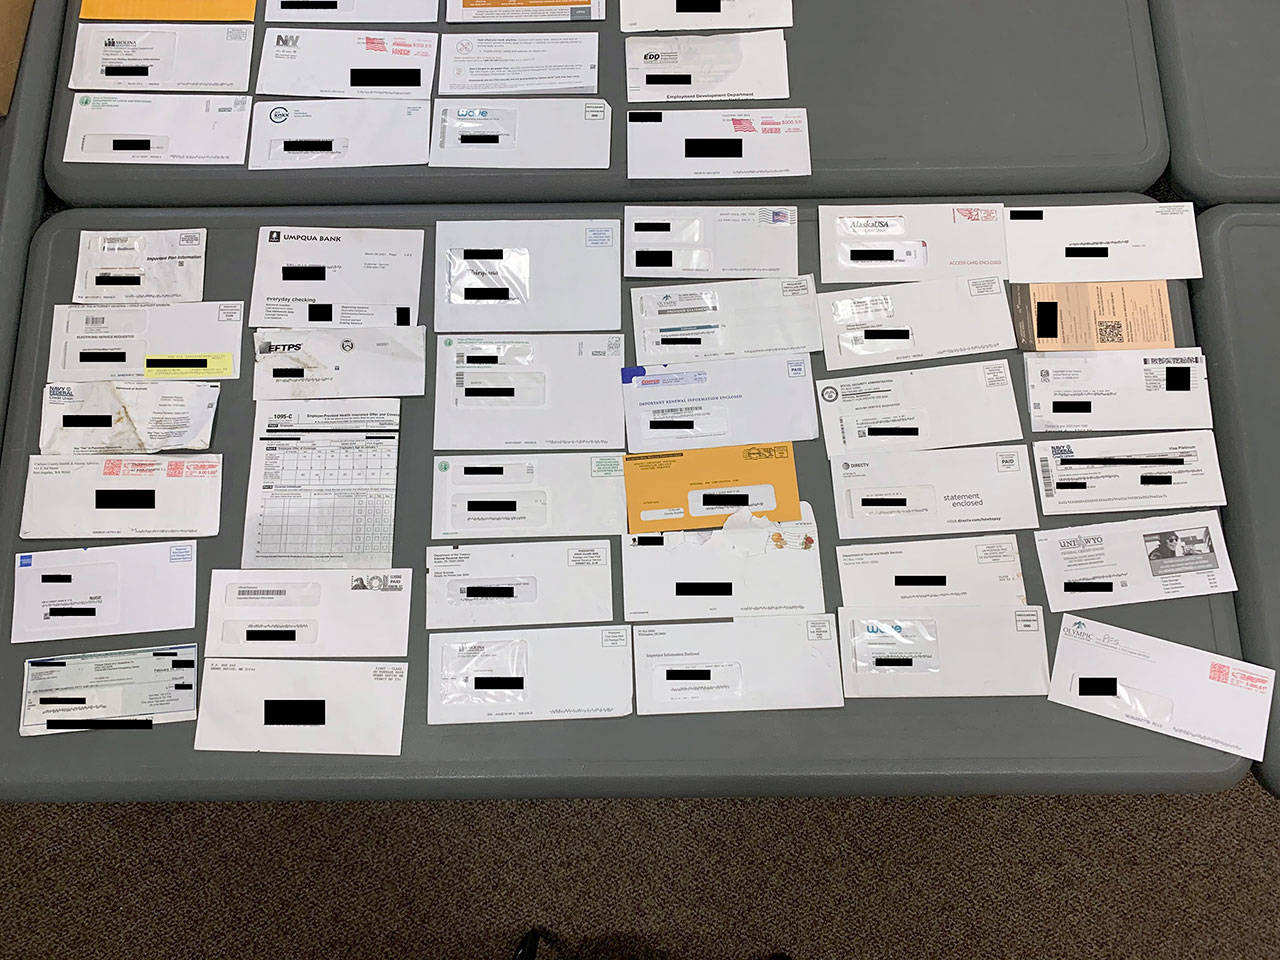 More than 100 pieces of mail and other items were recovered from a Port Angeles man’s vehicle, according to the Clallam County Sheriff’s Office.